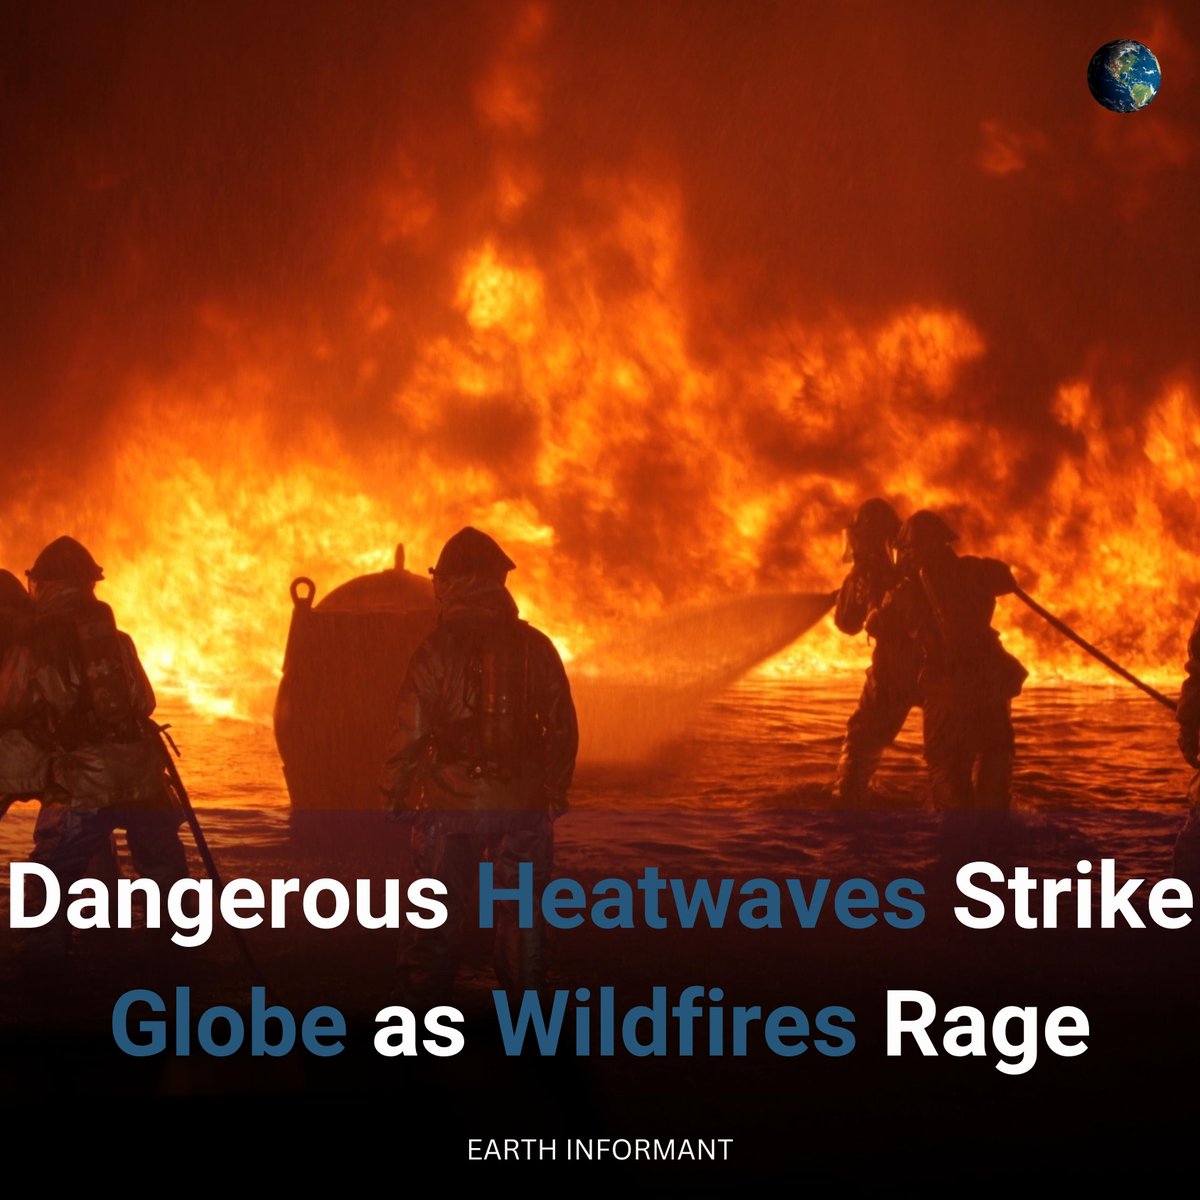 Heatwaves are gripping various parts of the world, leading to devastating consequences such as wildfires and record-breaking temperatures.
Discover more on our website through the link in our bio.

#HeatwaveAlert #GlobalWarmingConsequences #ExtremeWeatherEvents #WildfiresRage